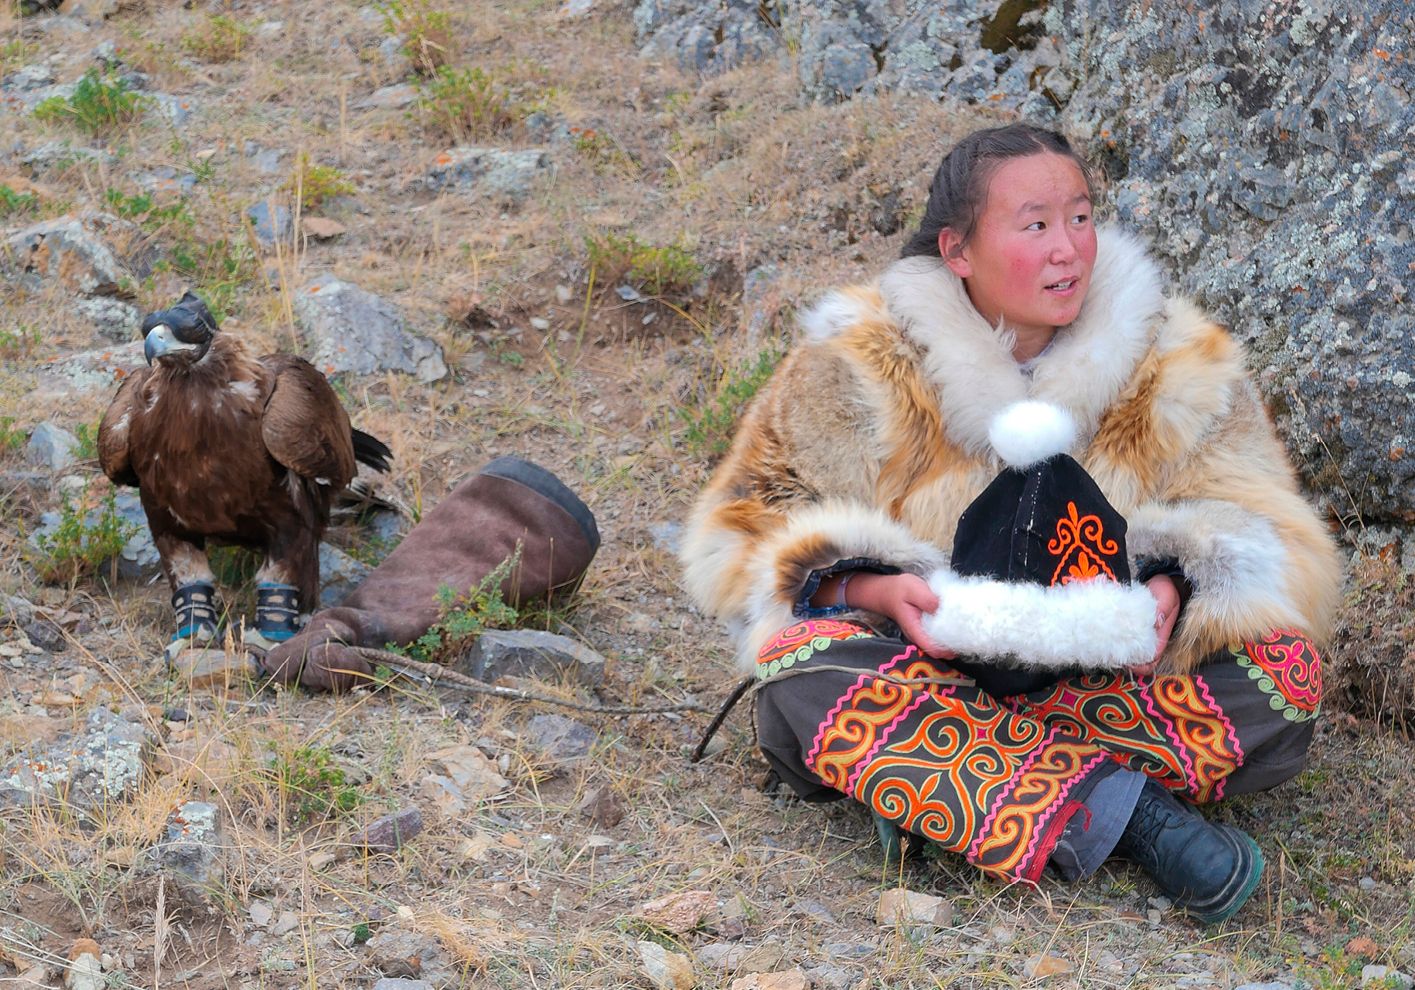 Eagle hunting is practised by male and female nomads